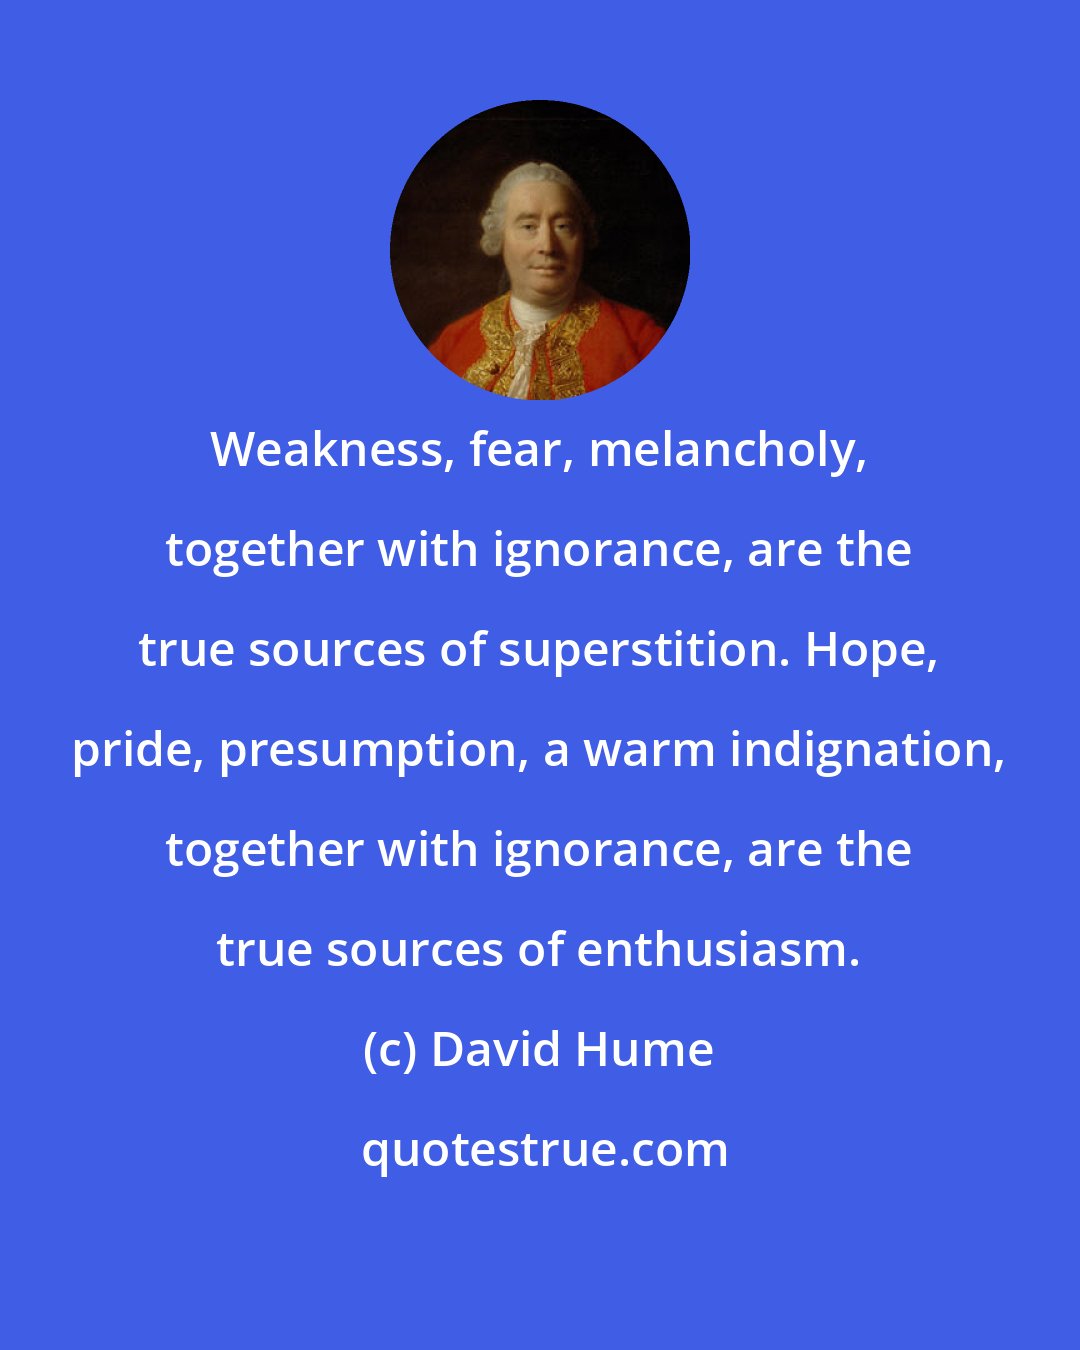 David Hume: Weakness, fear, melancholy, together with ignorance, are the true sources of superstition. Hope, pride, presumption, a warm indignation, together with ignorance, are the true sources of enthusiasm.